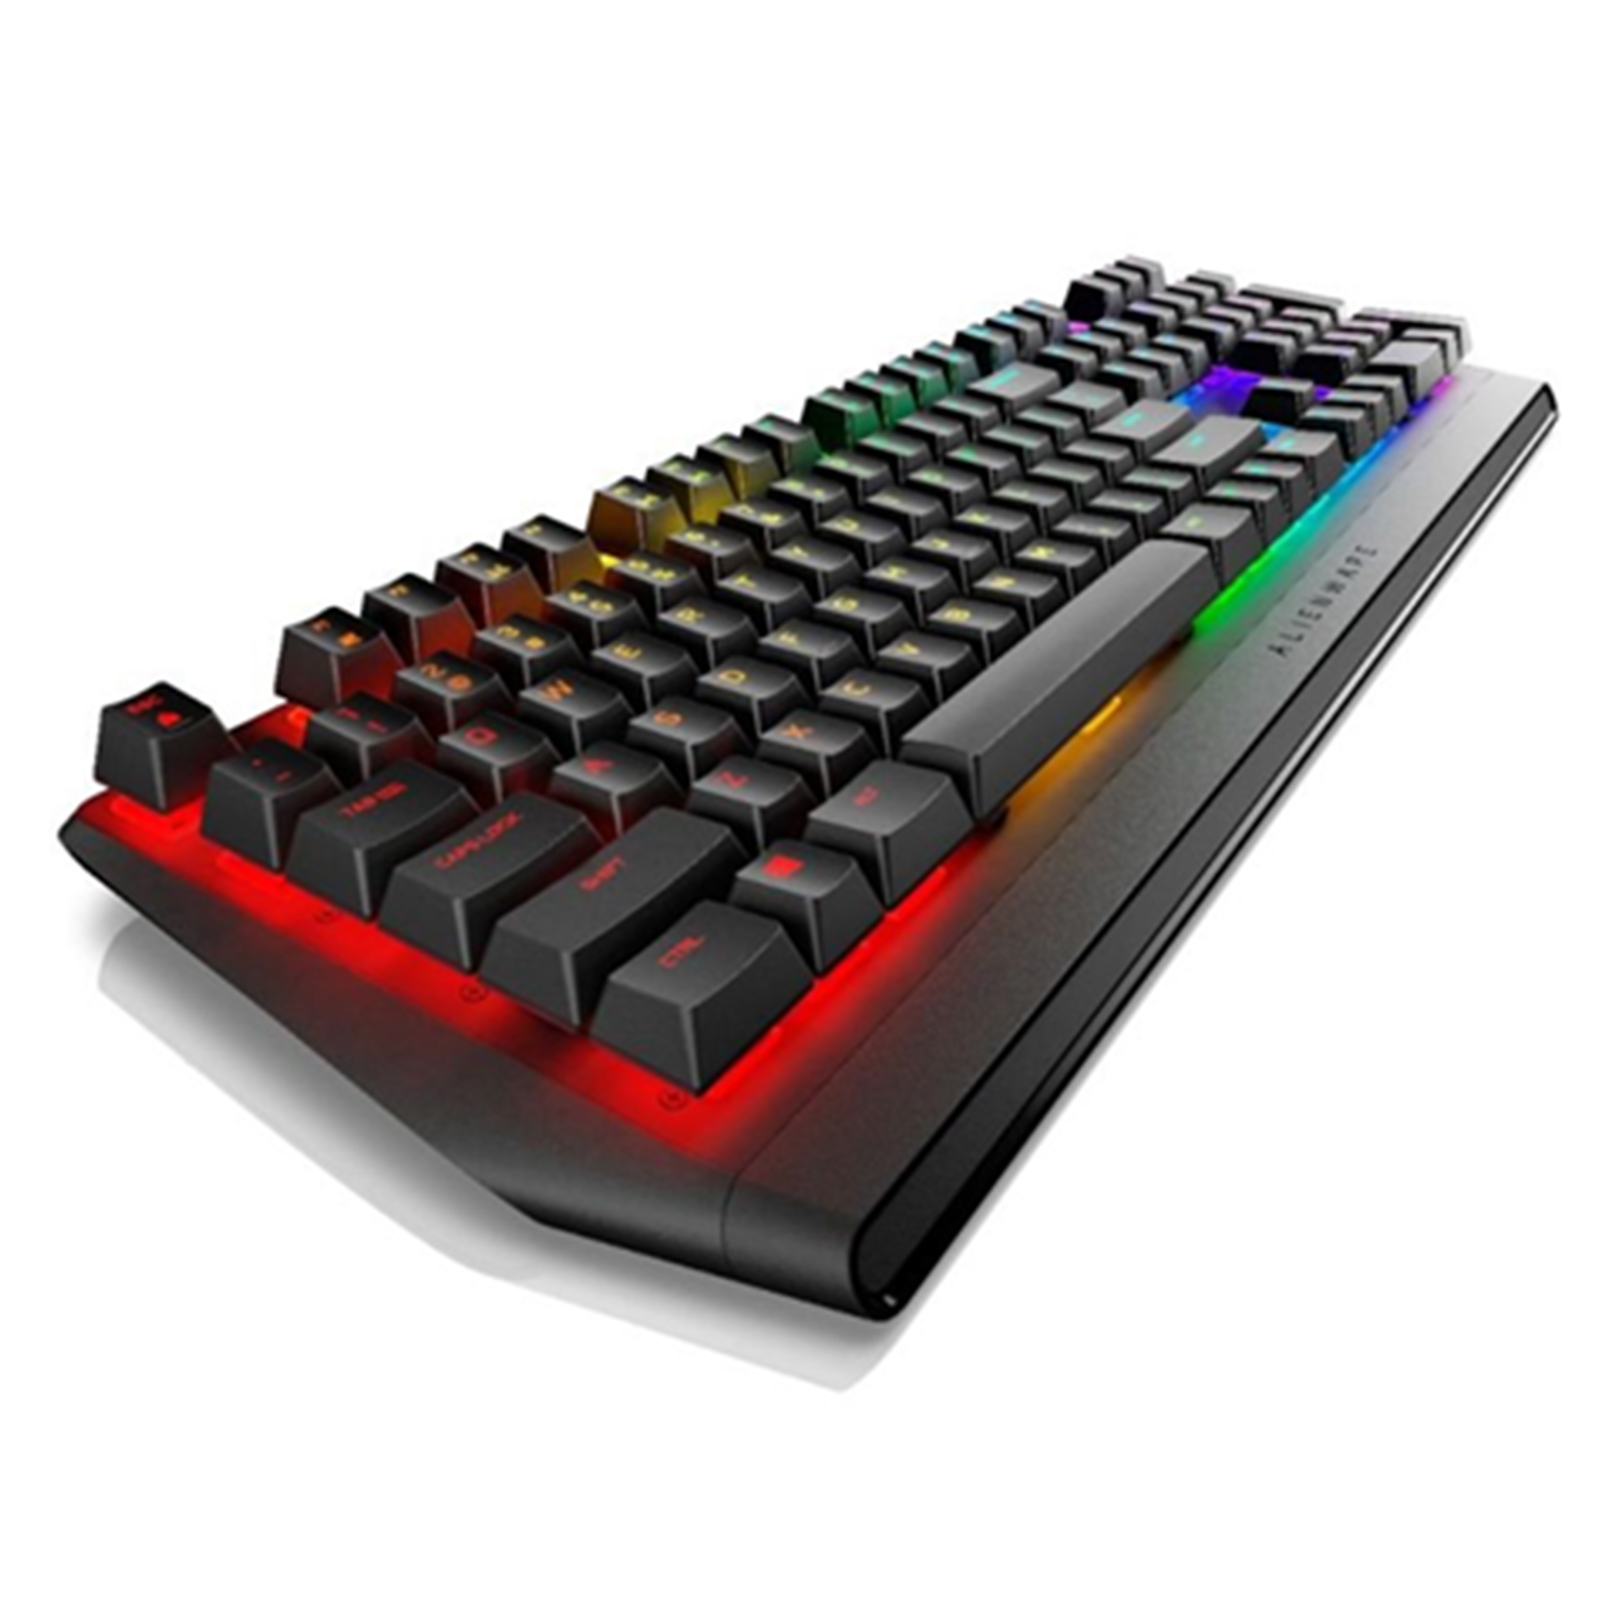 DELL Alienware AW 568 Clavier Gaming-Mecanique-RGB-AZERTY